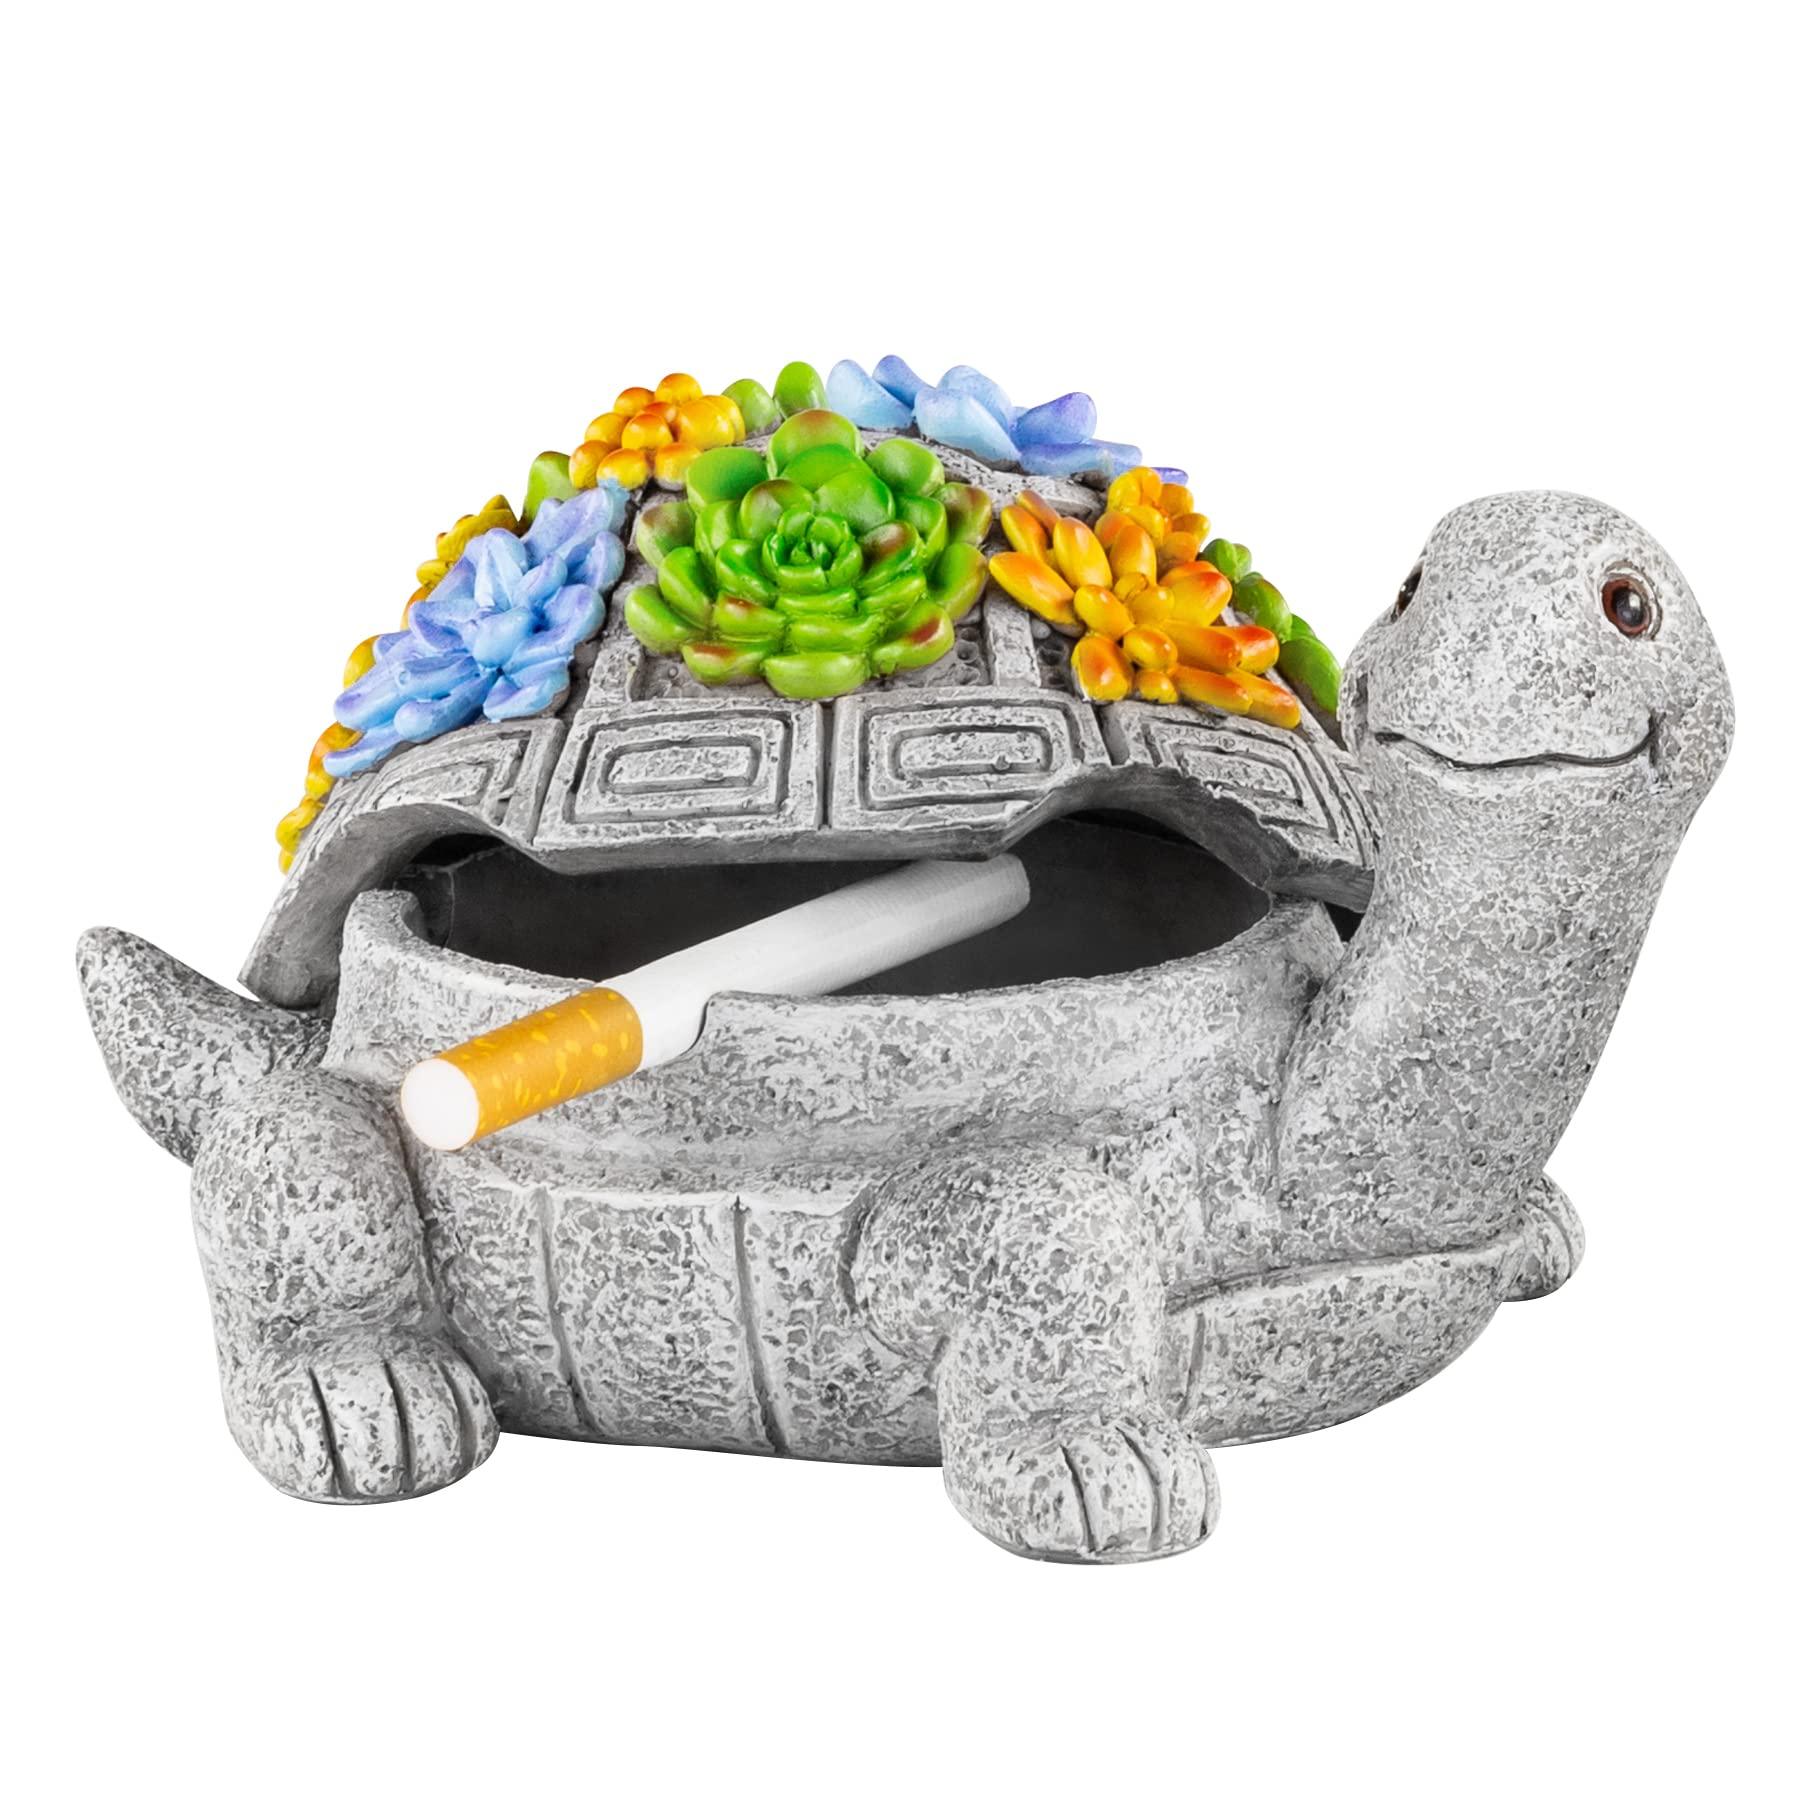 LESES Ashtray, Outdoor Ashtray with Lid Smokeless Waterproof Ash Tray with Cute Turtle Decor, Resin Ashtray for Cigarettes Home Office, Porch Patio Decorations Outdoor Indoor Ashtray - CookCave